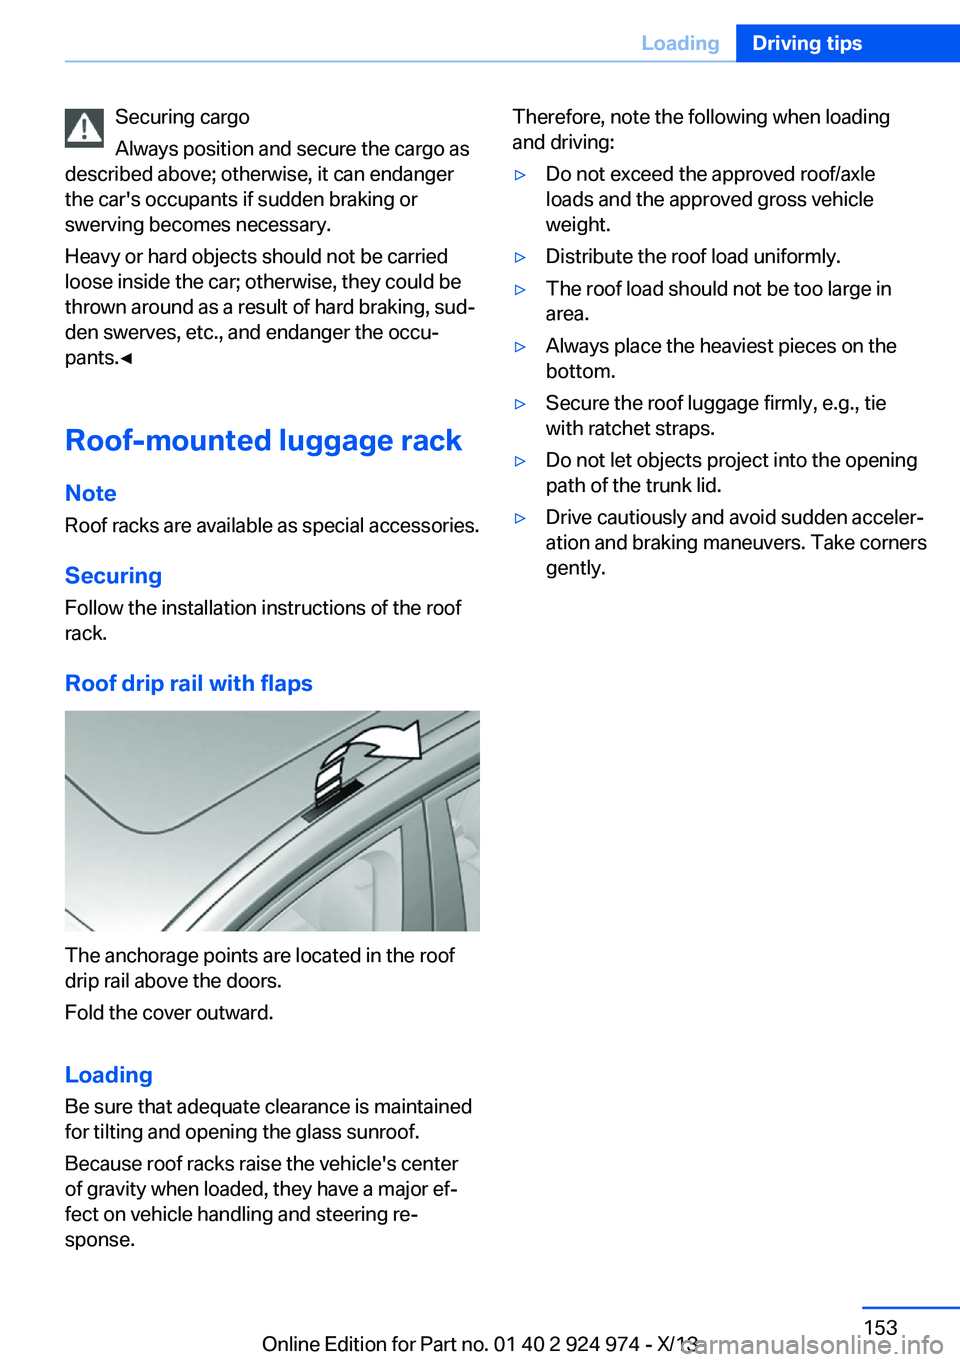 BMW 228ICOUPE 2014  Owners Manual Securing cargo
Always position and secure the cargo as
described above; otherwise, it can endanger
the car's occupants if sudden braking or
swerving becomes necessary.
Heavy or hard objects should